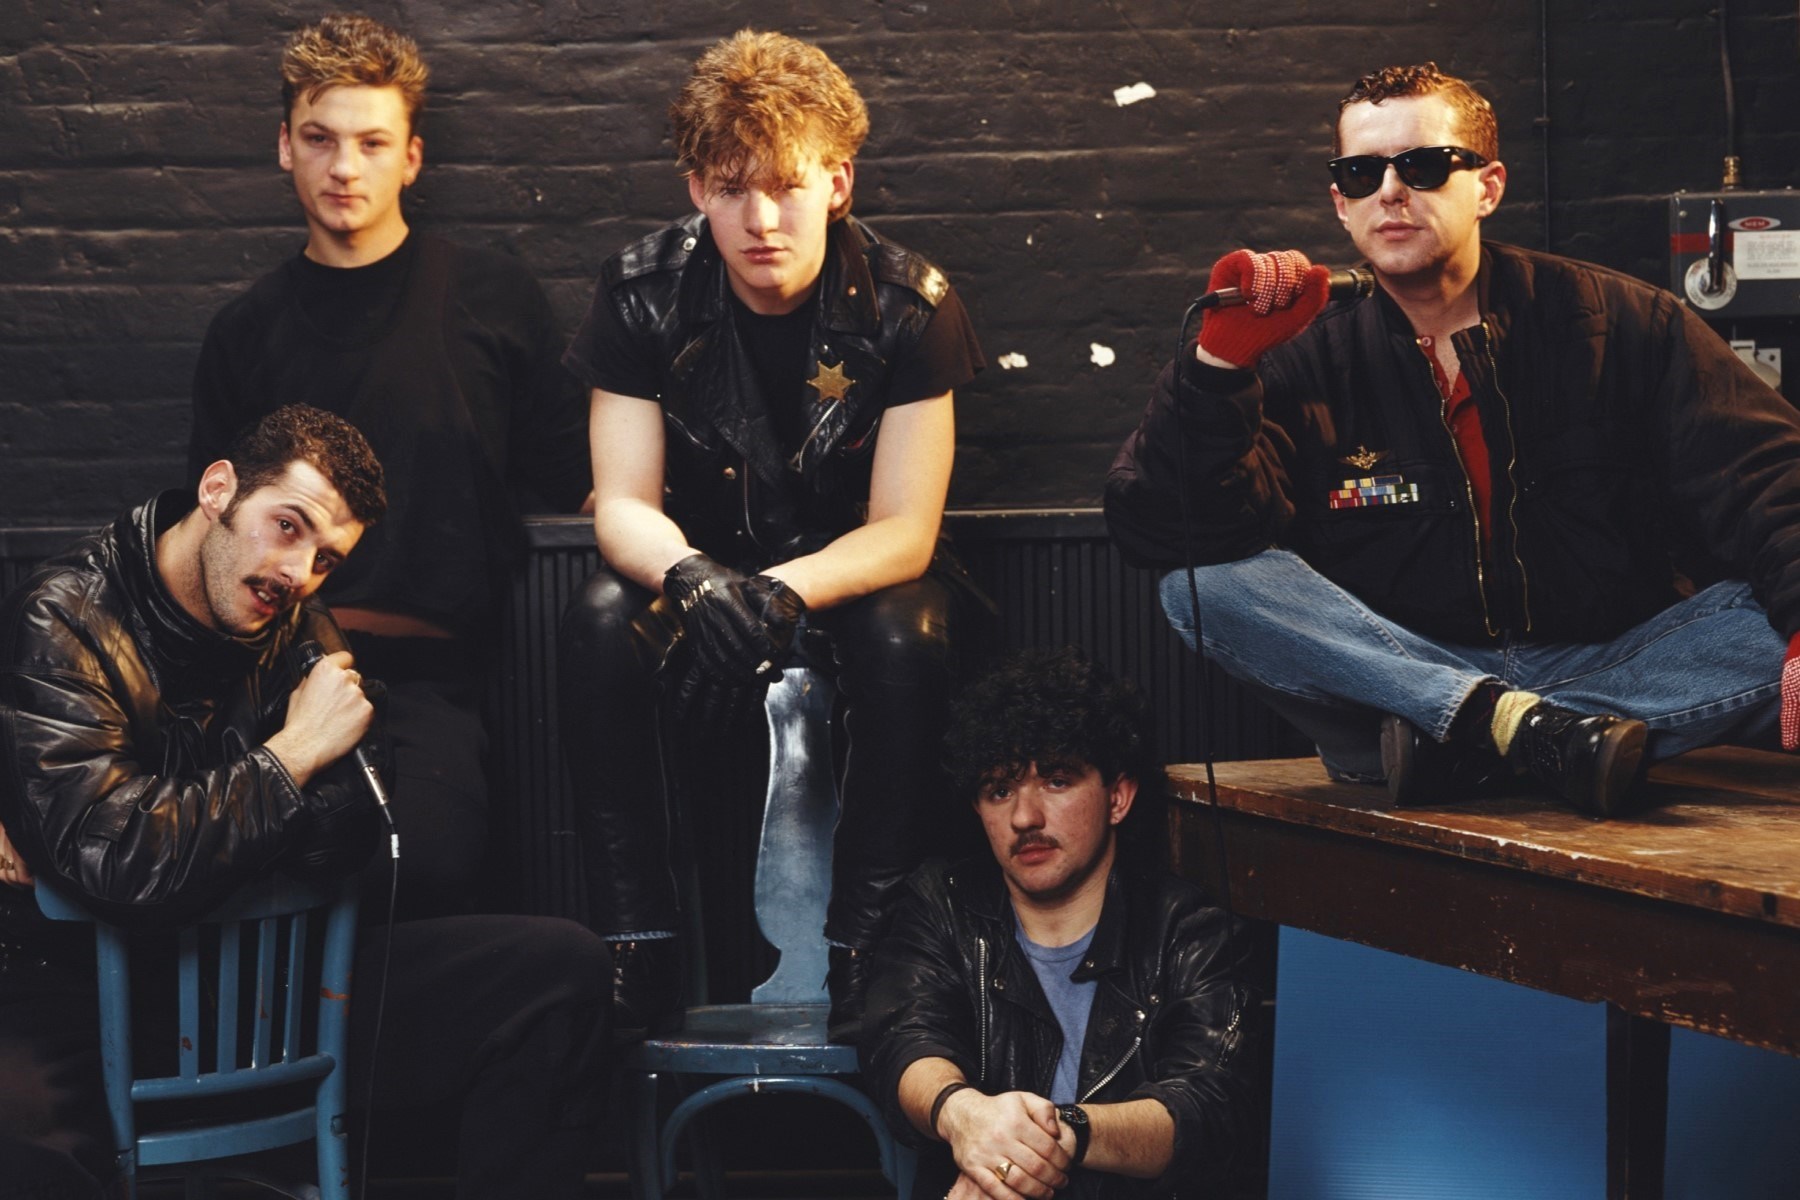 Unwind And Let Loose: The Mind-Blowing Lyrics Of 'Relax' By Frankie Goes To Hollywood!